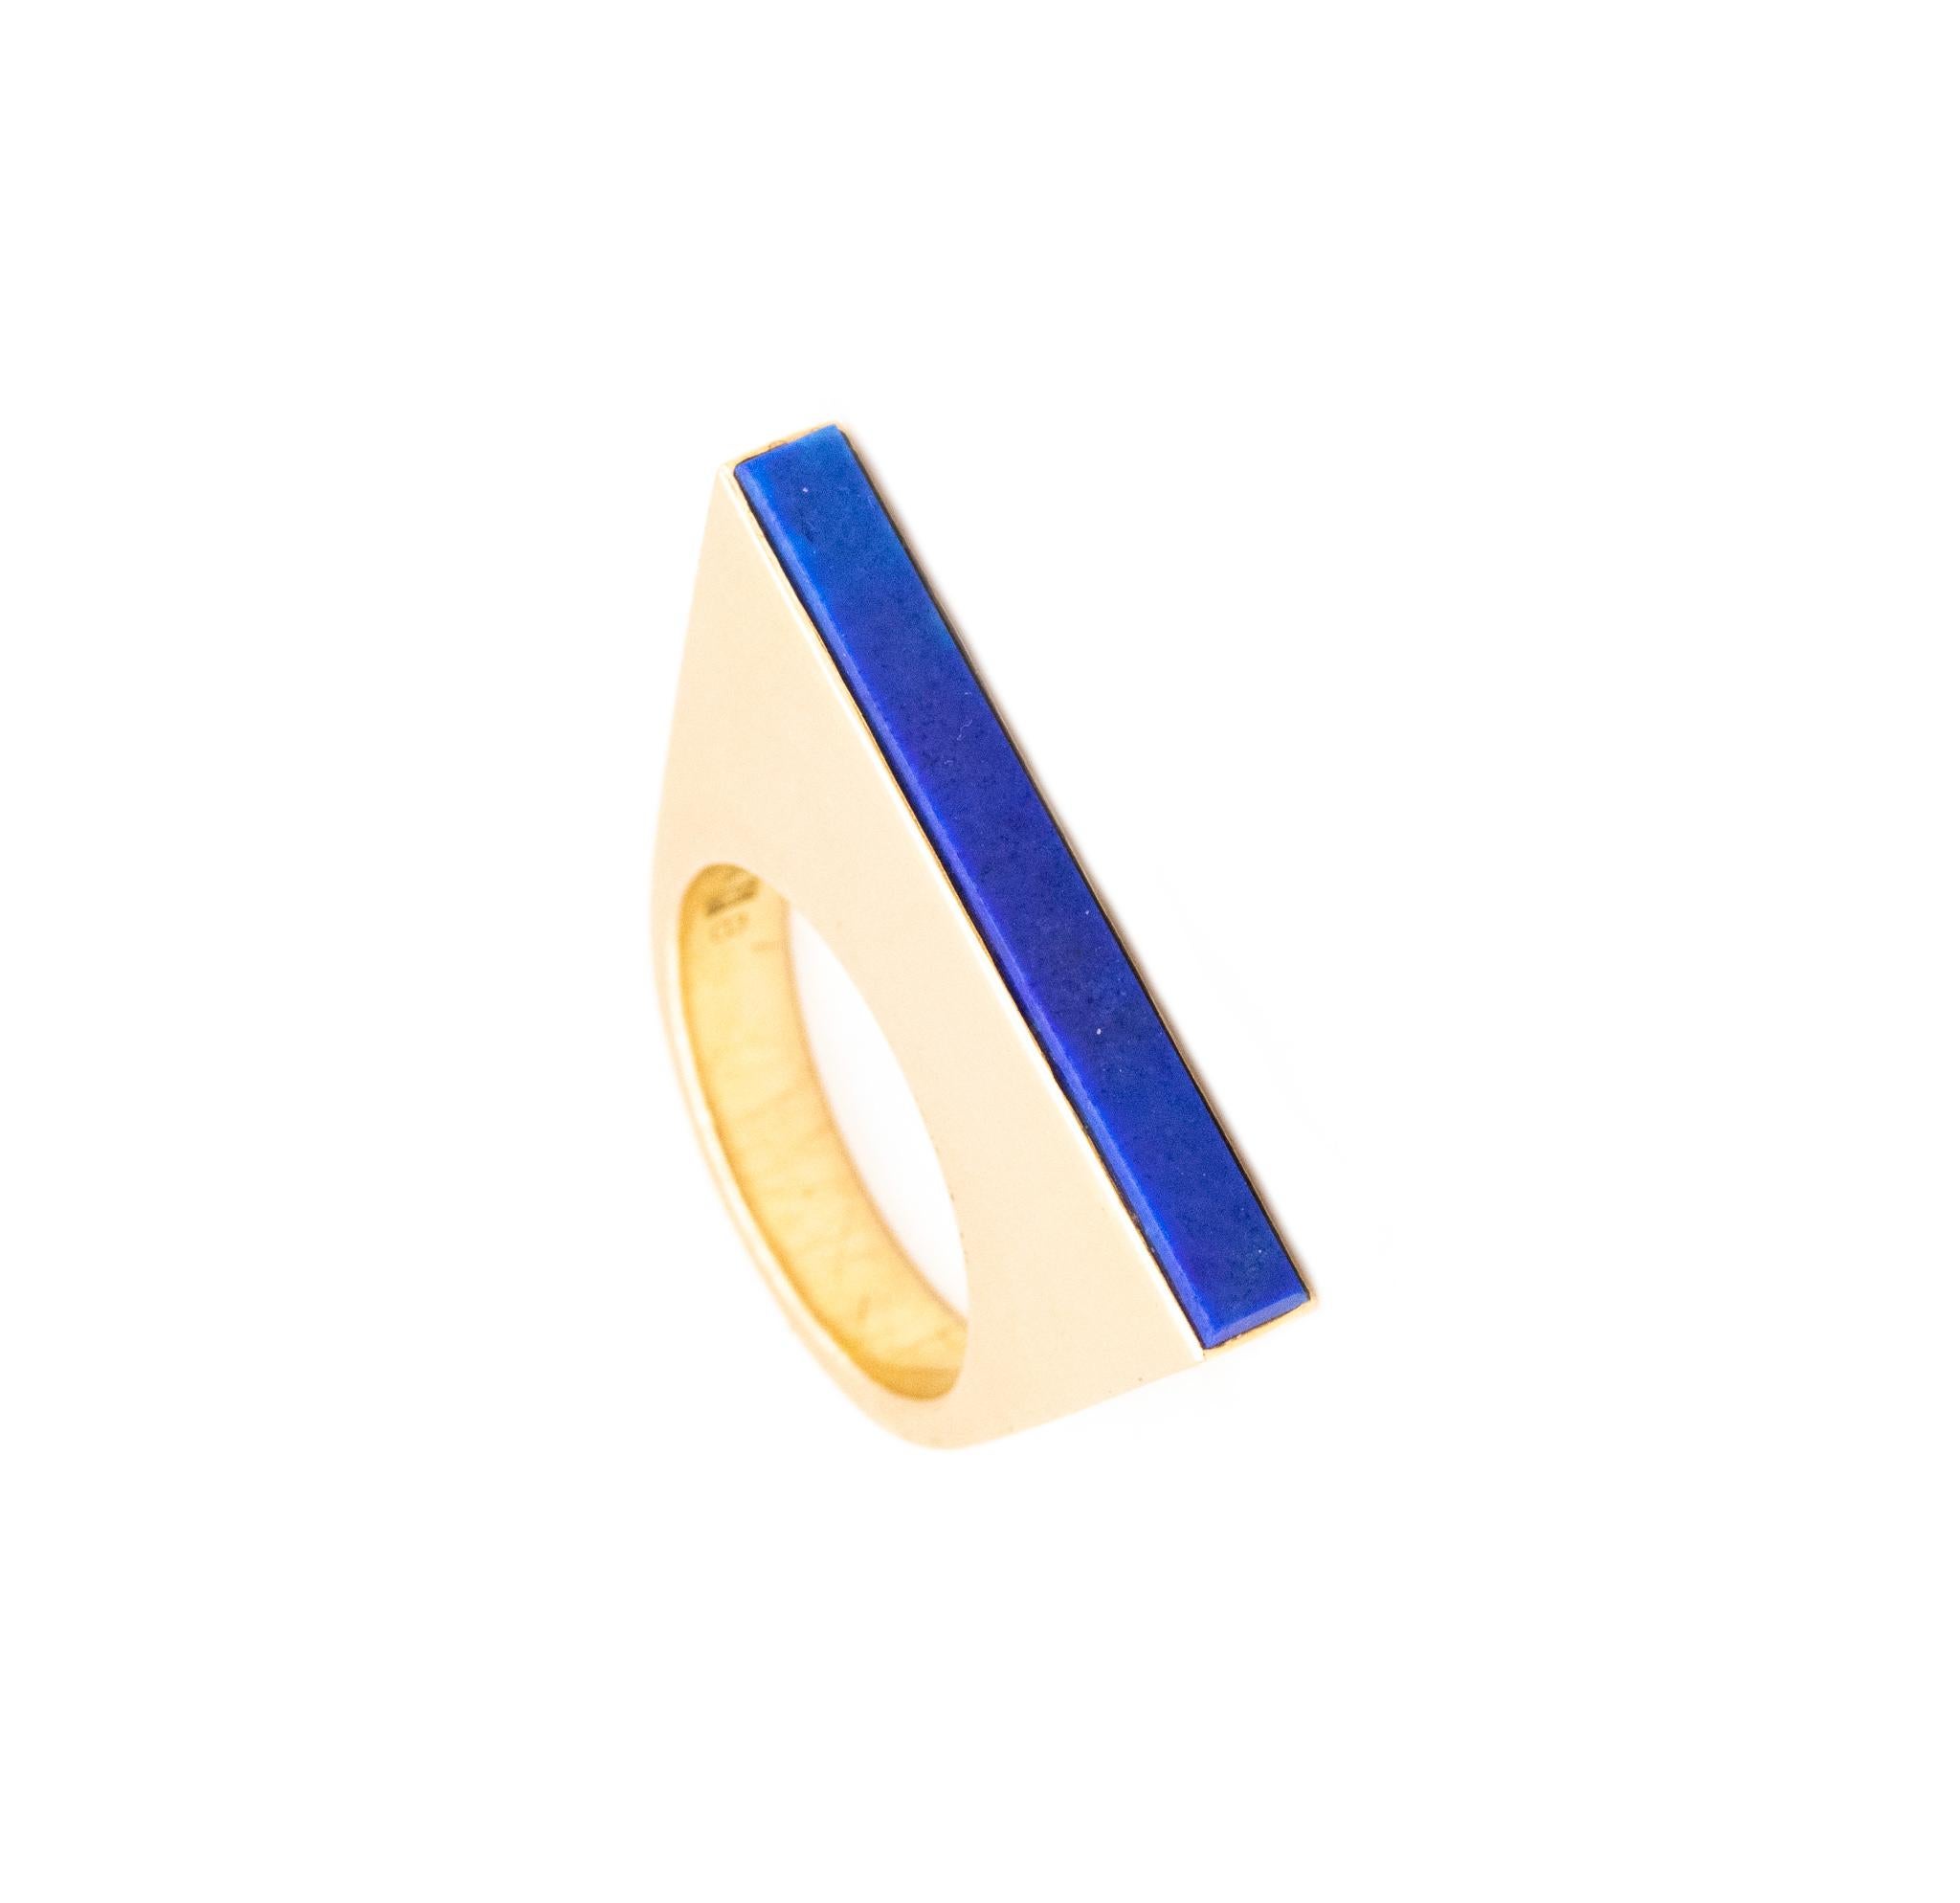 Geometric linear ring designed by Sigurd Persson (1914-2003).

A modernist piece created in Sweden, back  in the 1972 by the artist-sculptor Sigurd Persson. It was crafted, with very clean and recti-linear architectural patterns in solid yellow gold